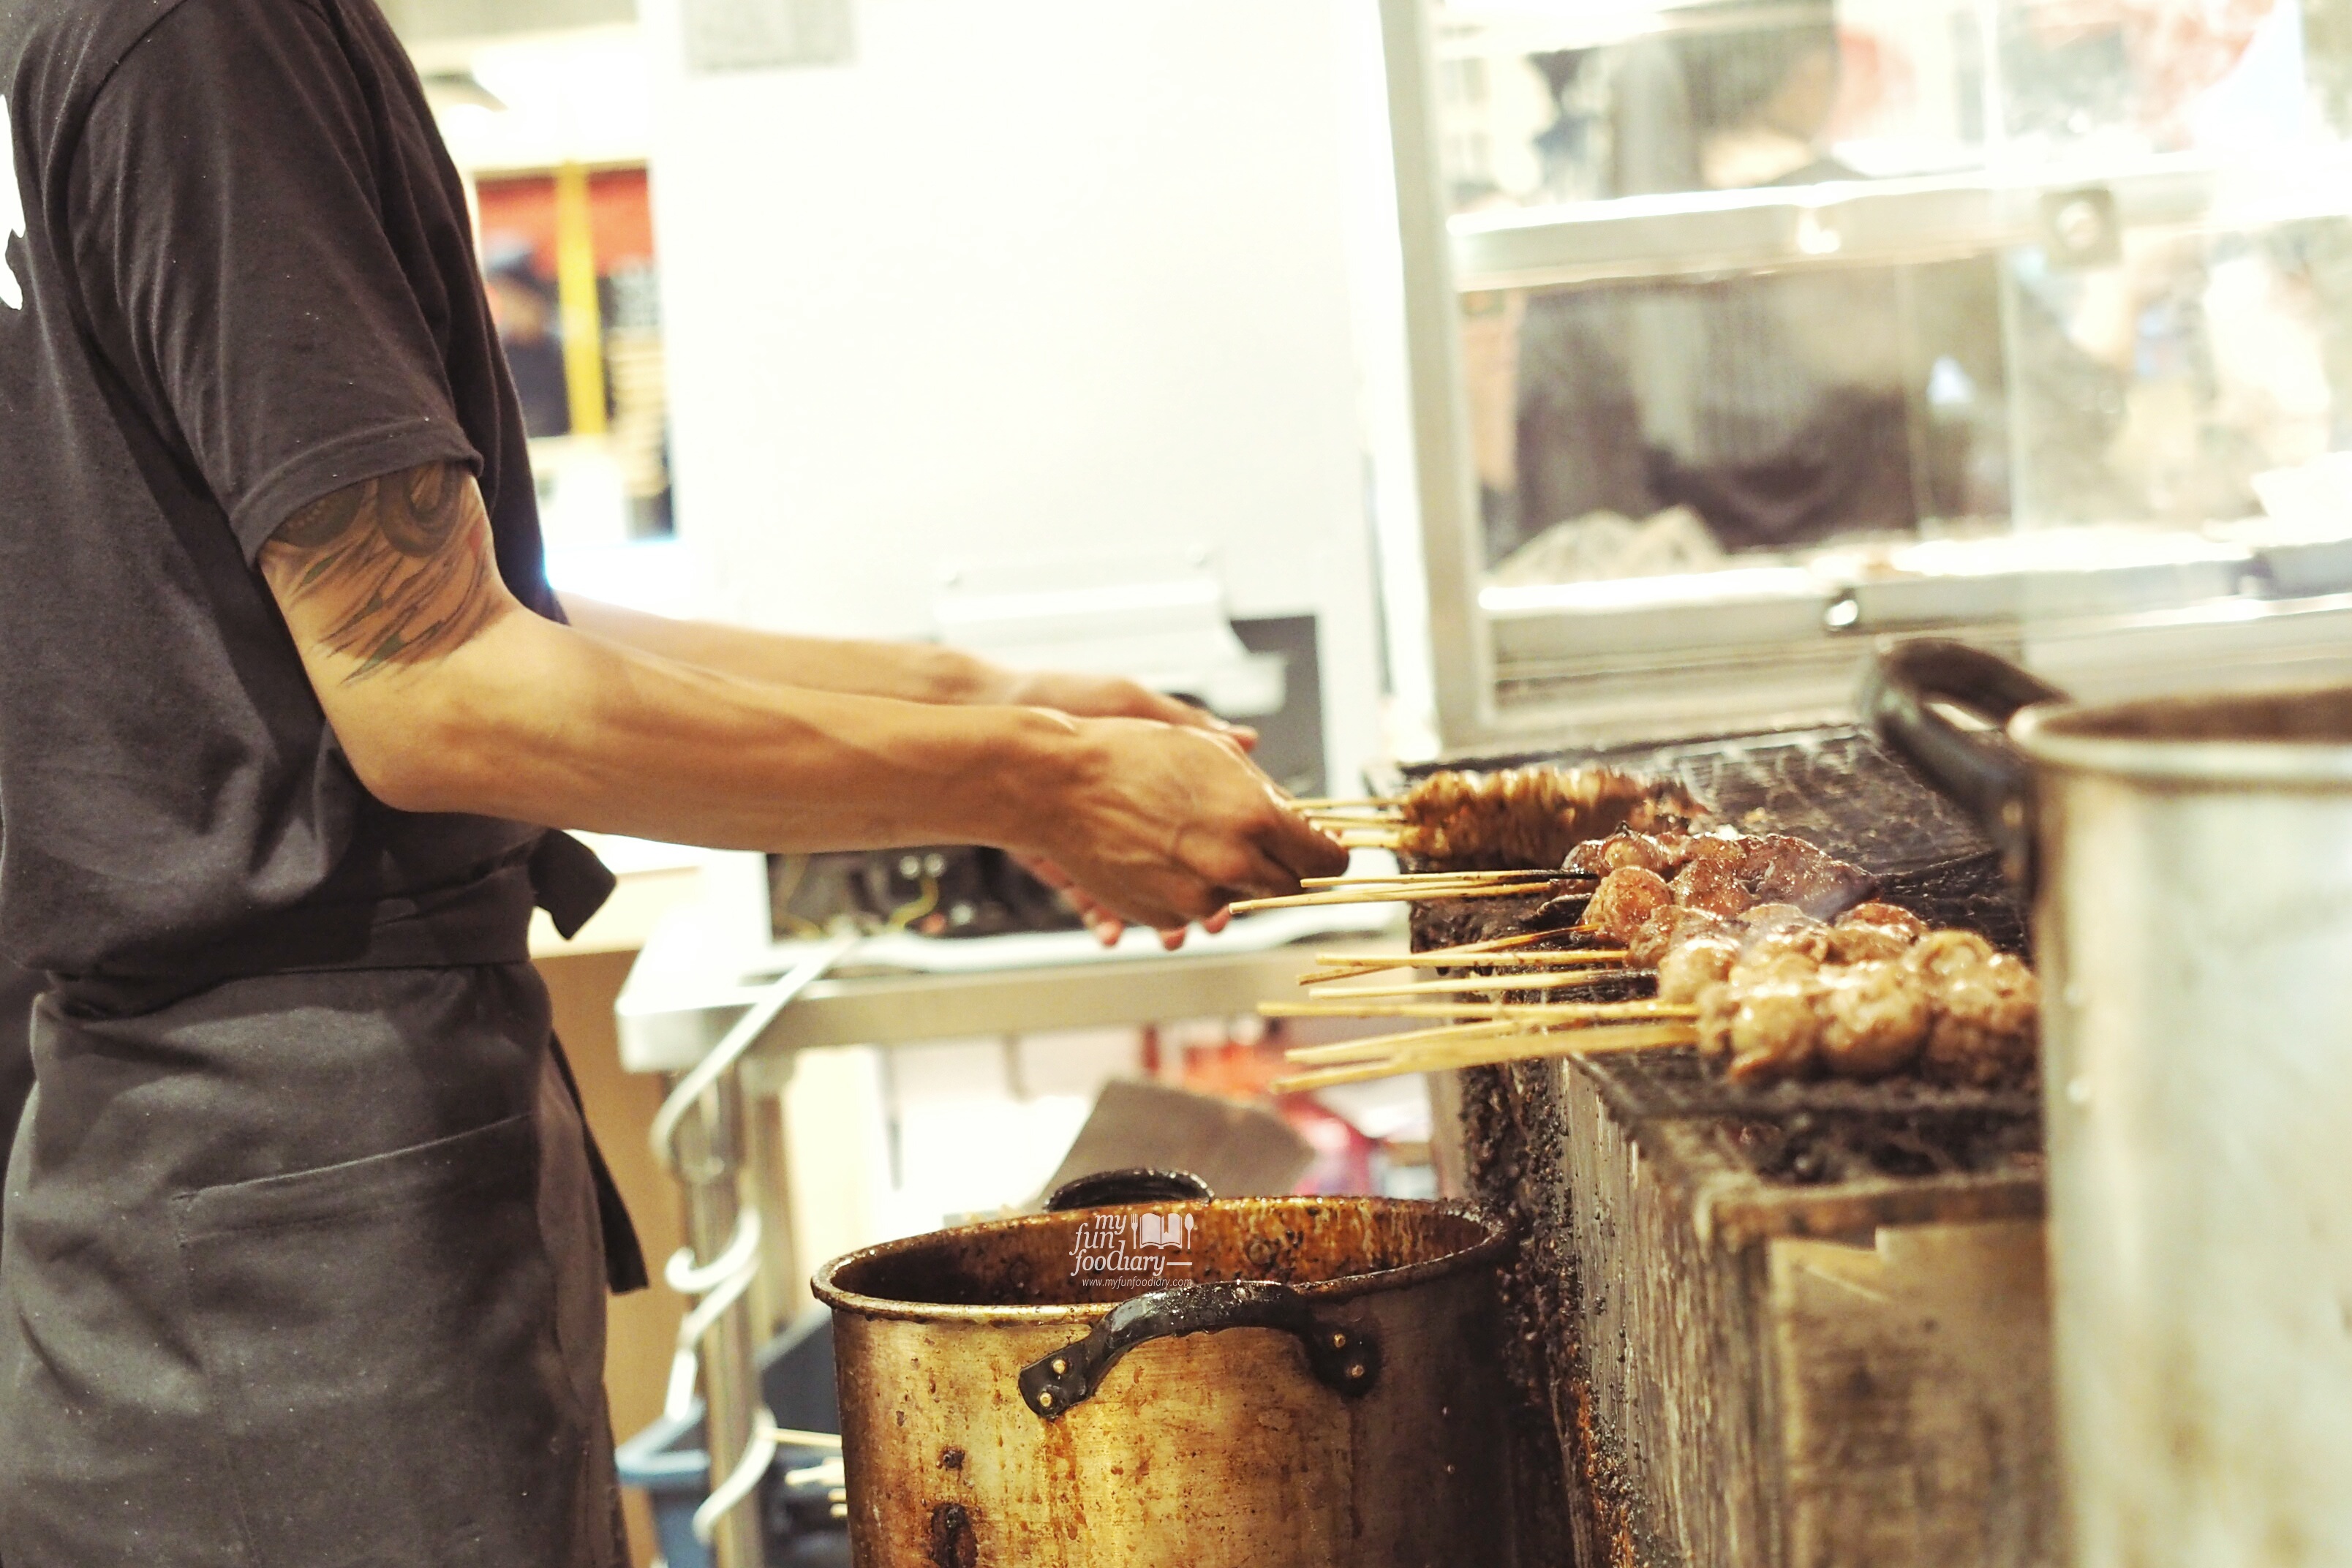 Grilled Yakitori at The Food Culture AEON Mall by Myfunfoodiary